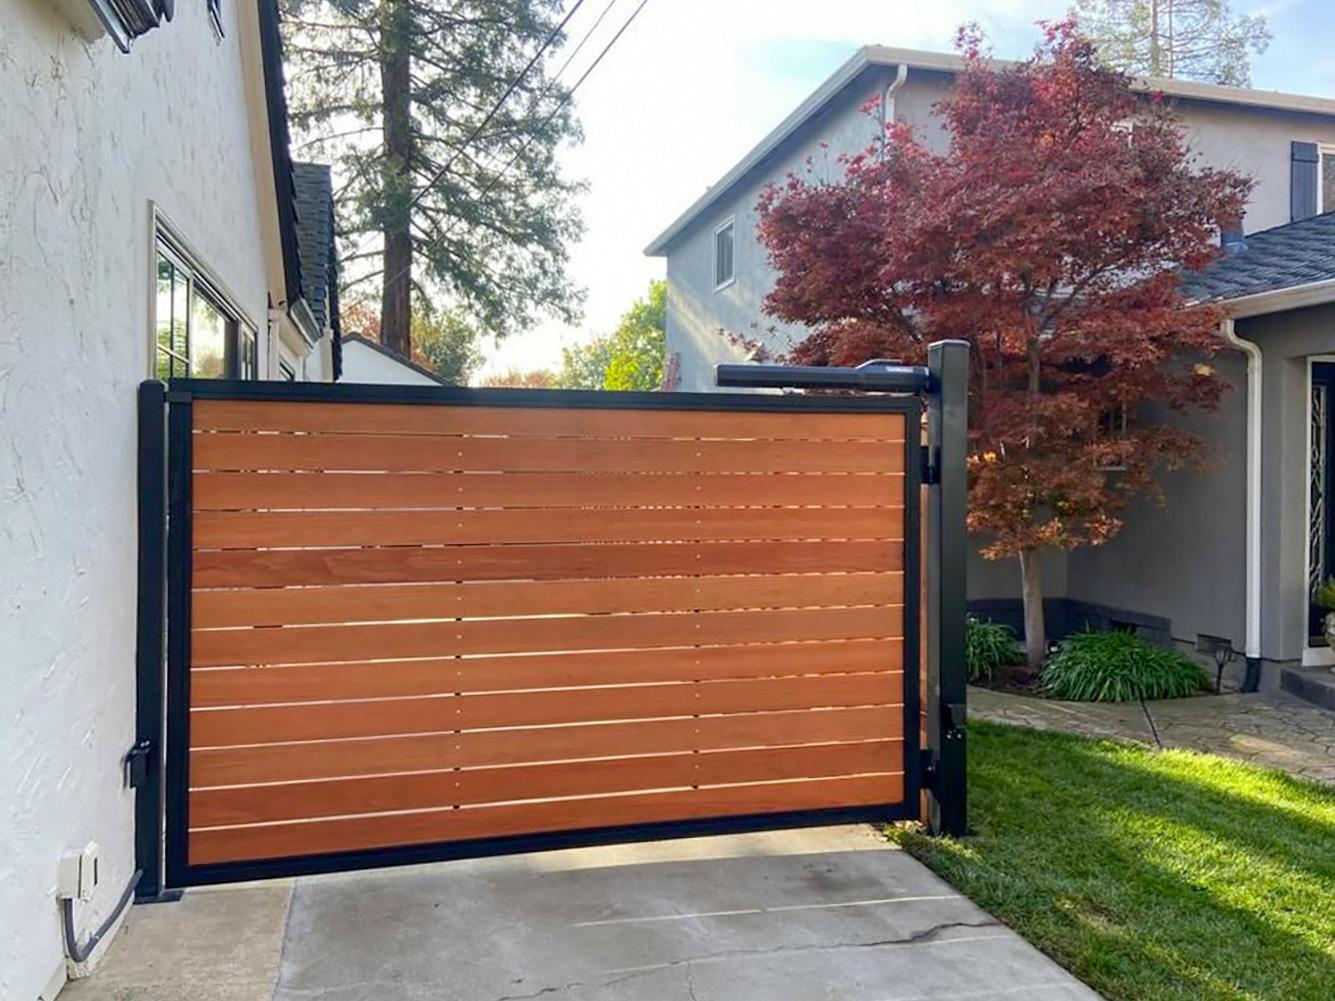 Picture of Automatic Gate Masters & Garage Doors, Inc. - Automatic Gate Masters & Garage Doors, Inc.